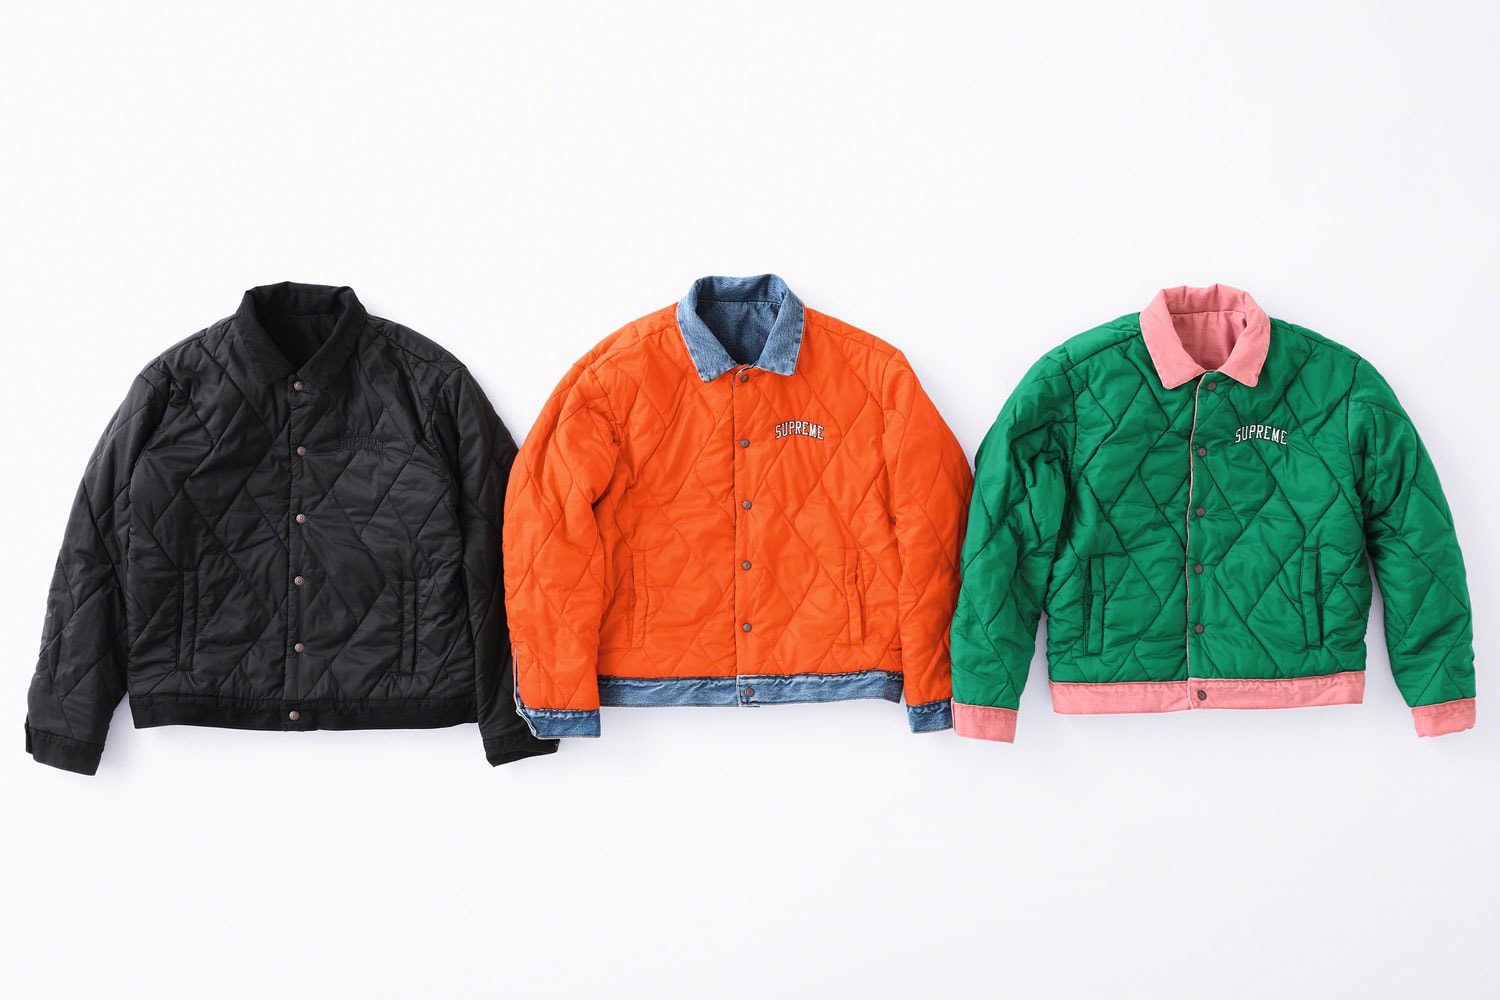 supreme levis fall winter 2018 collection collaboration exclusive Quilted Reversible Trucker Jacket denim coveralls stonewashed november 1 3 2018 release date info drop colorways orange blue black logo green pink lining